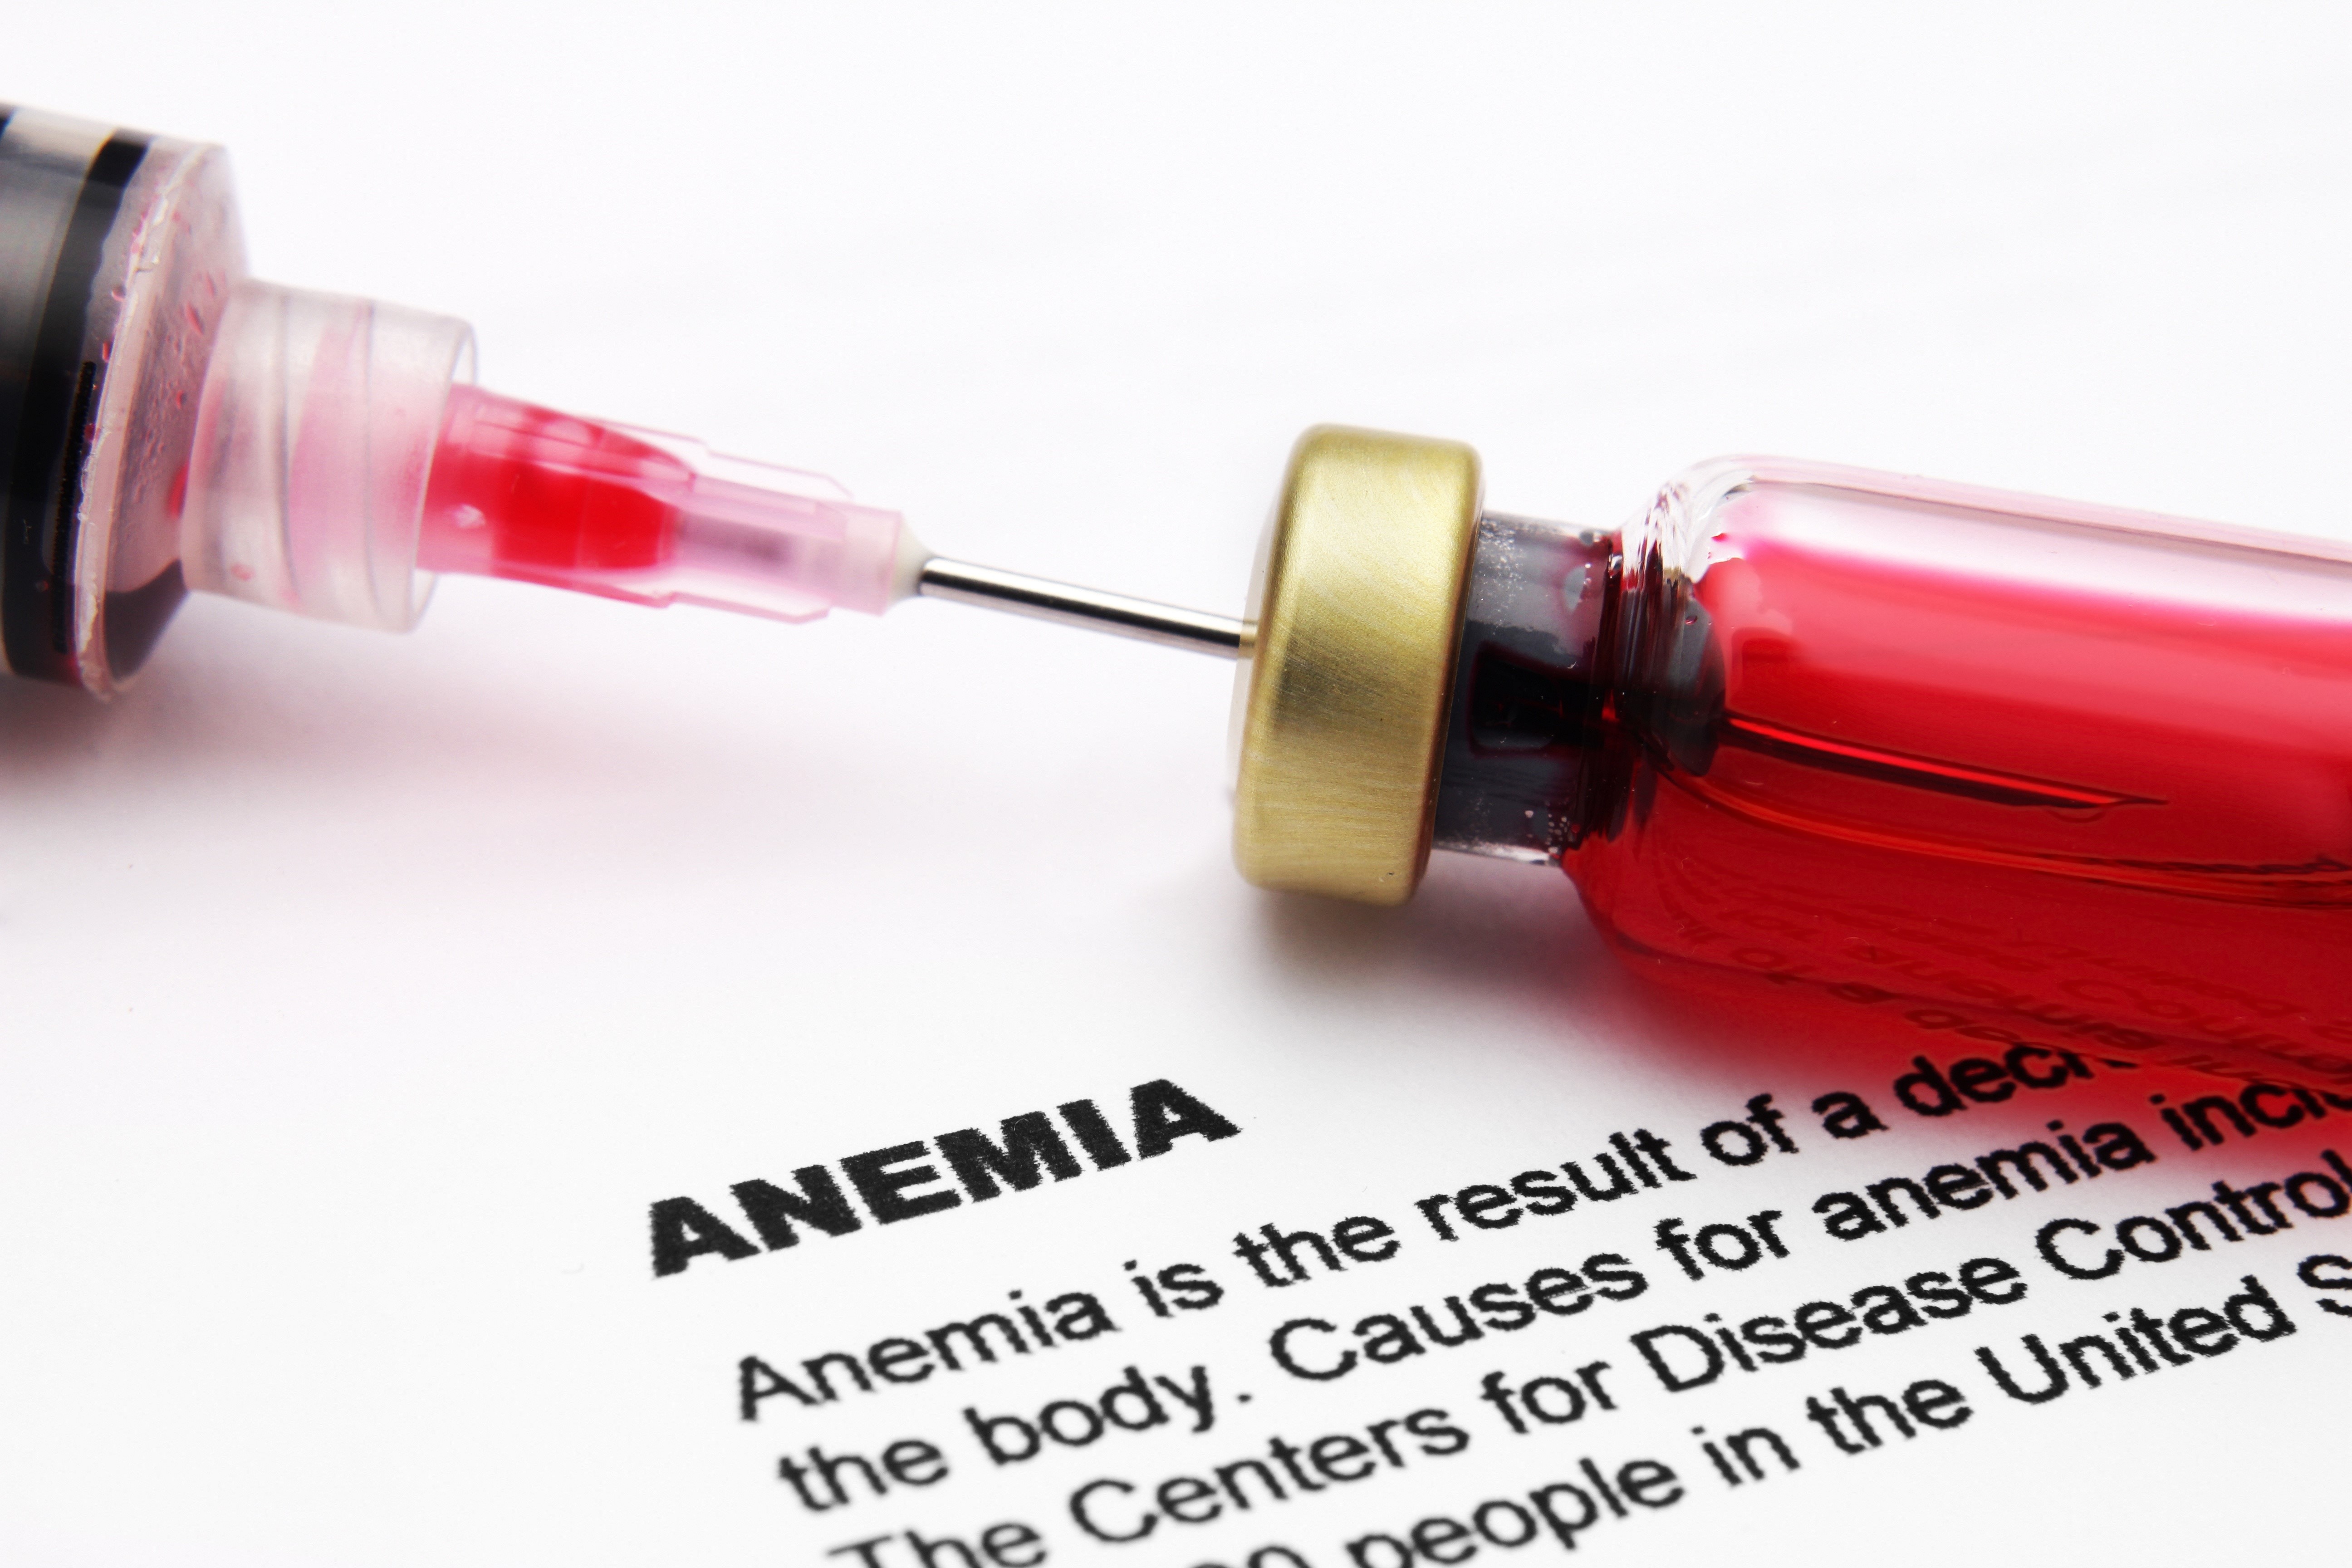 Iron deficiency anaemia… Why iron supplementation isn’t the answer and why 1 in 5 have stored iron overload causing tissue damage and early aging